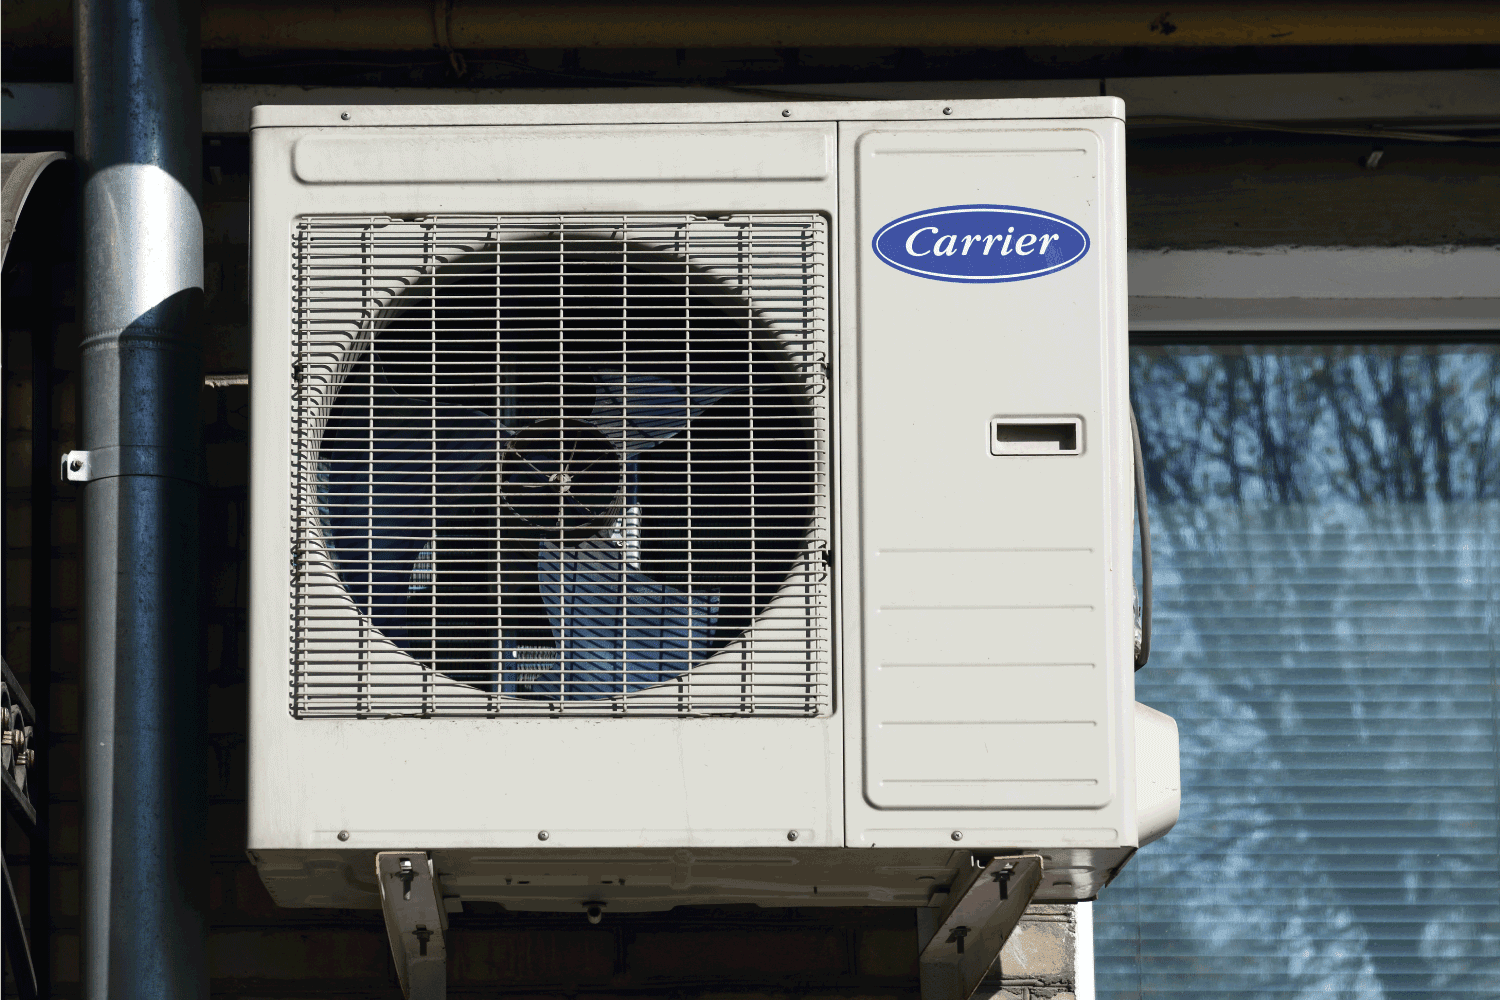 Conditioning CARRIER air conditioning outside the building.